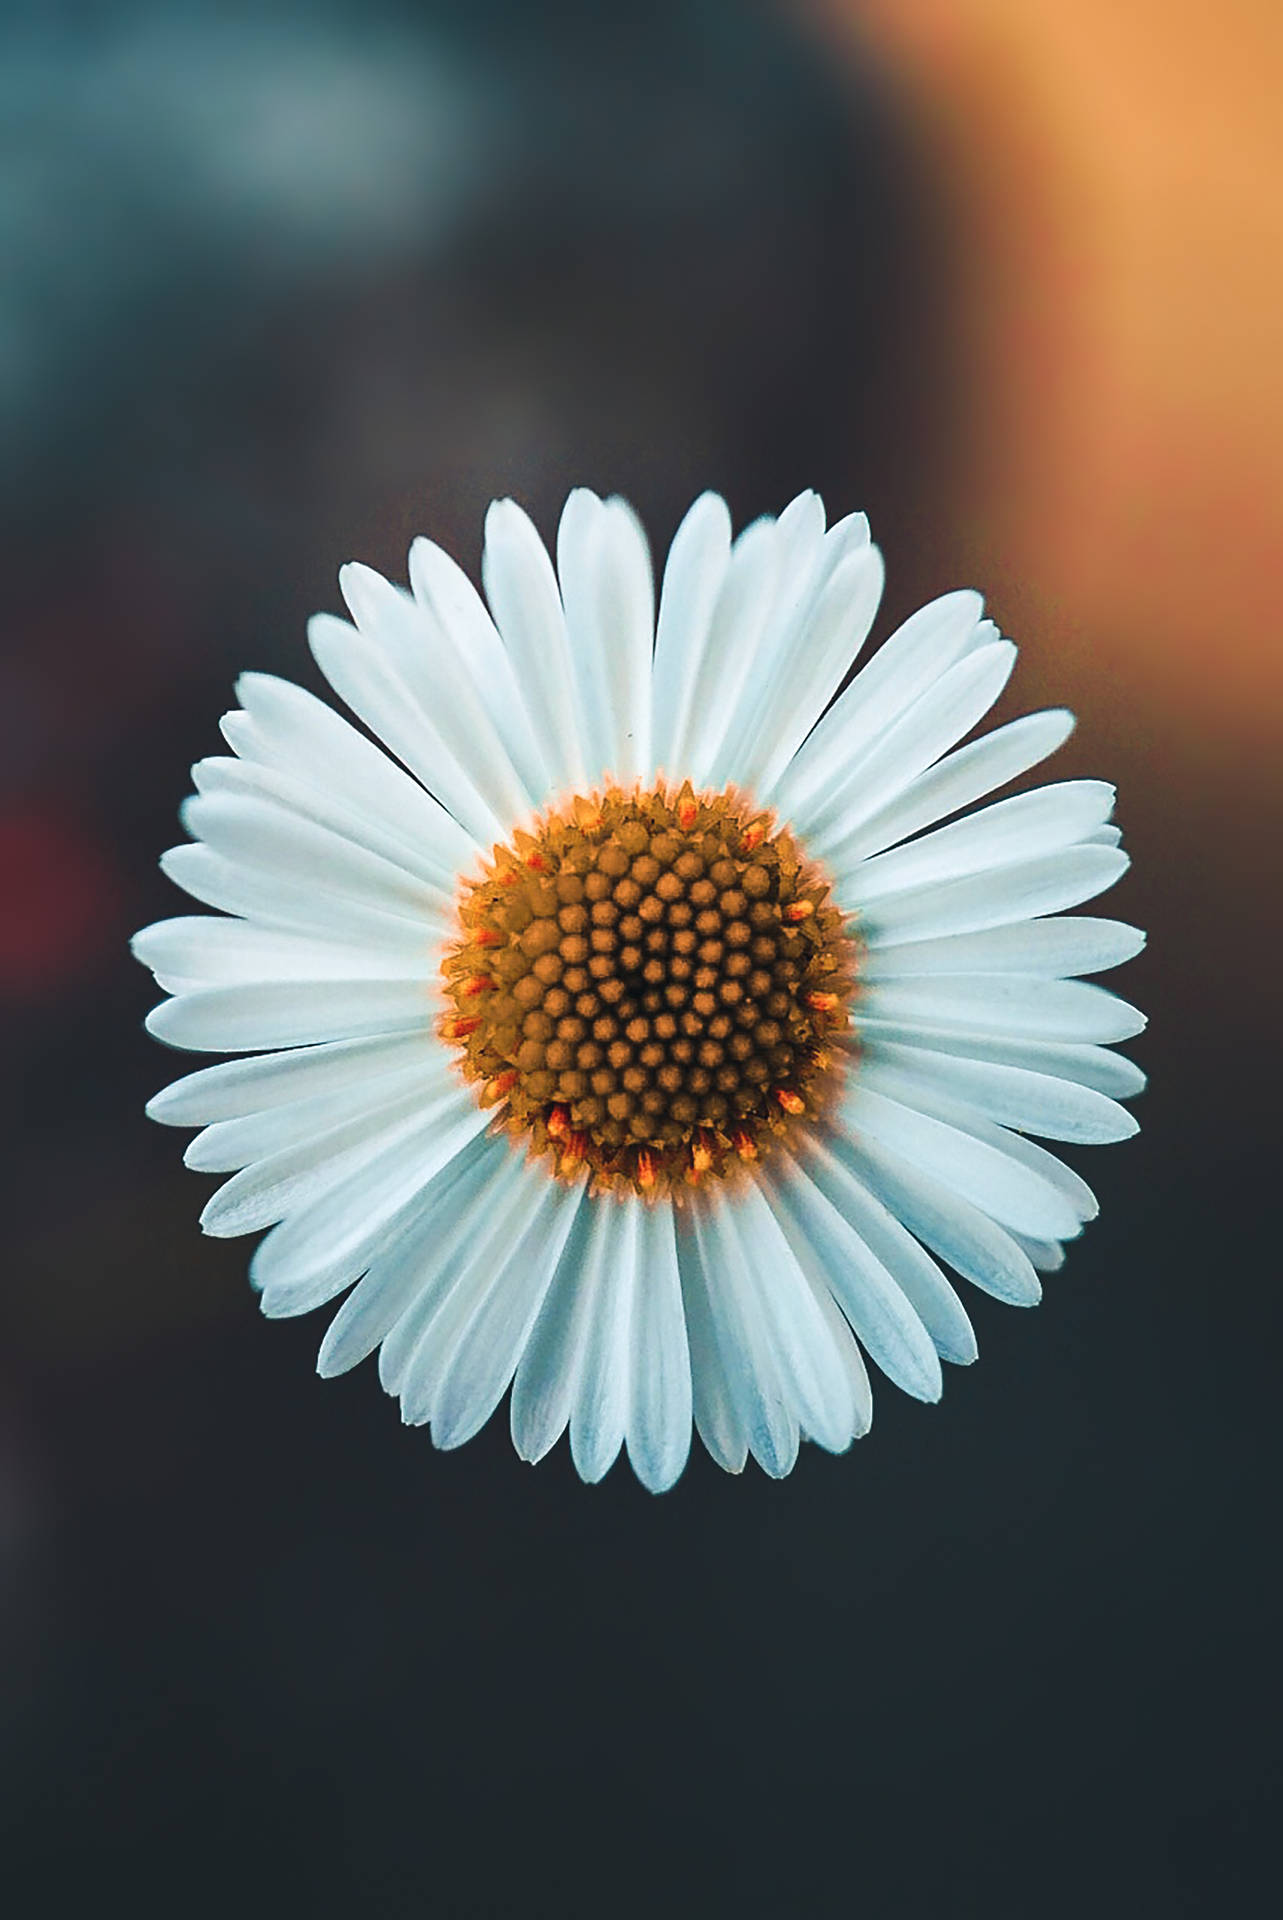 Daisy 2333X3490 Wallpaper and Background Image